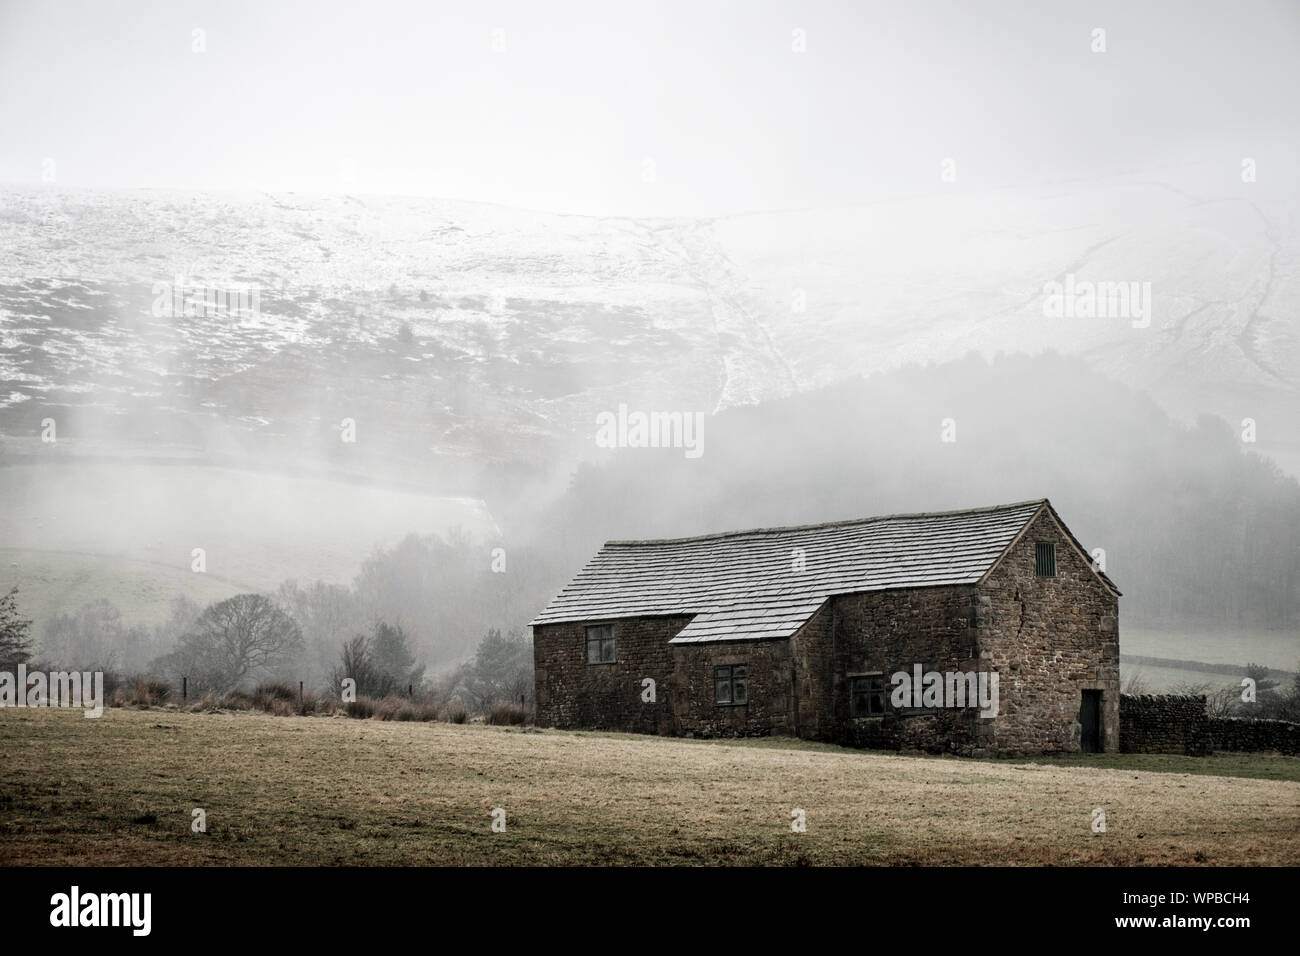 Snow storm approaching a stone barn in a countryside field in Winter with Kinder Scout in the background. Derbyshire, Peak District, England, UK Stock Photo